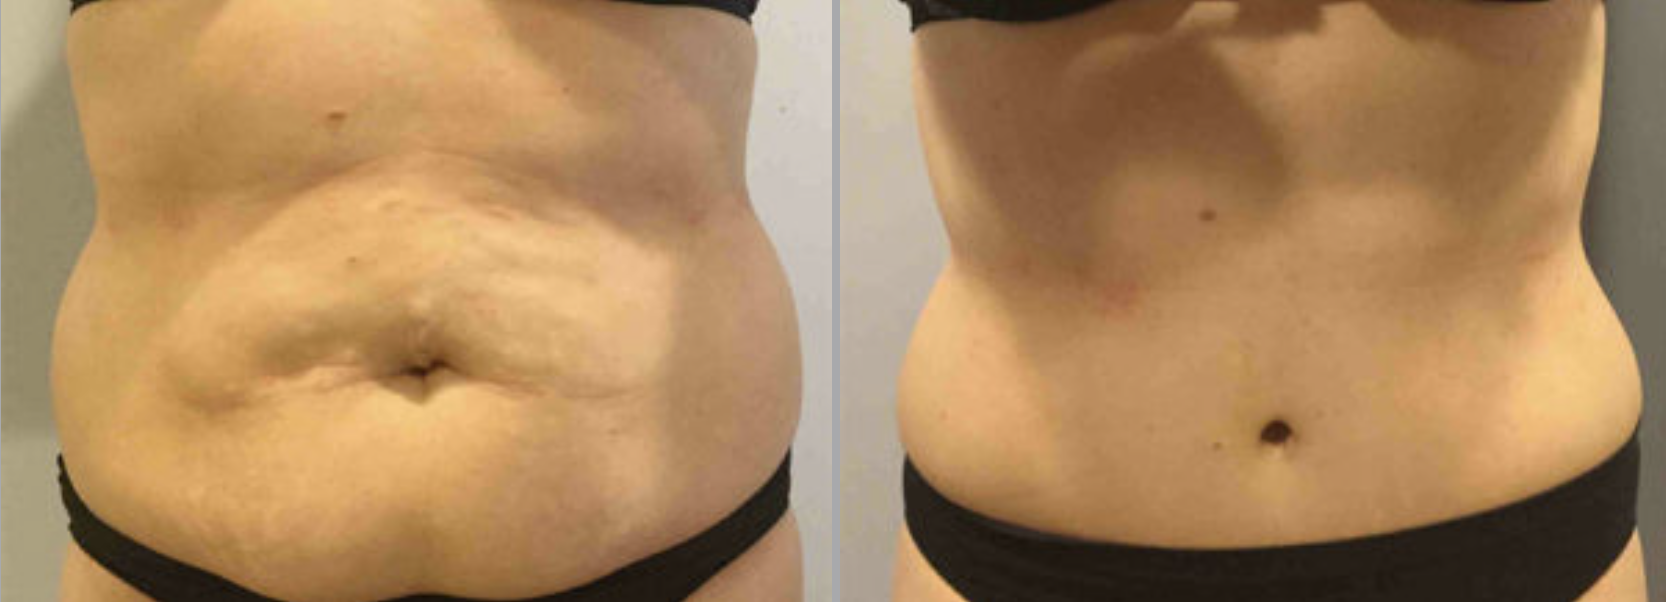 Abdominoplasty Before and After Pictures in Bucks County, PA and Hunterdon County, NJ